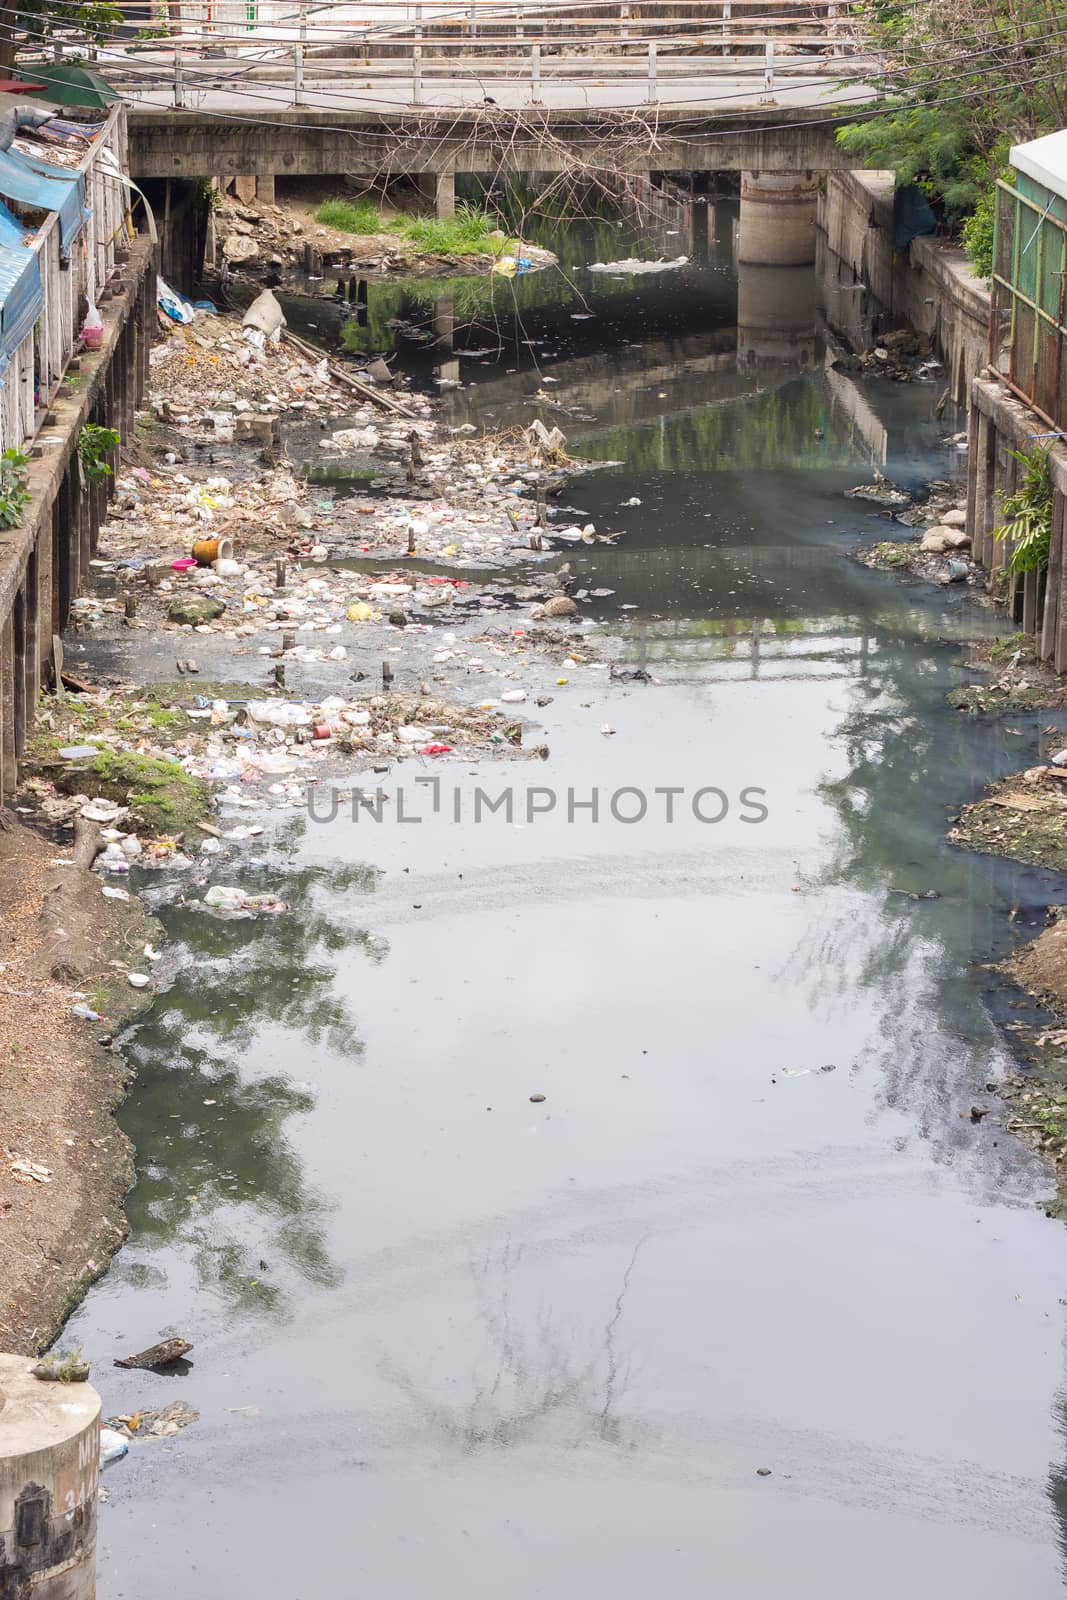 polluted River with rubbish in bangkok Thailand.